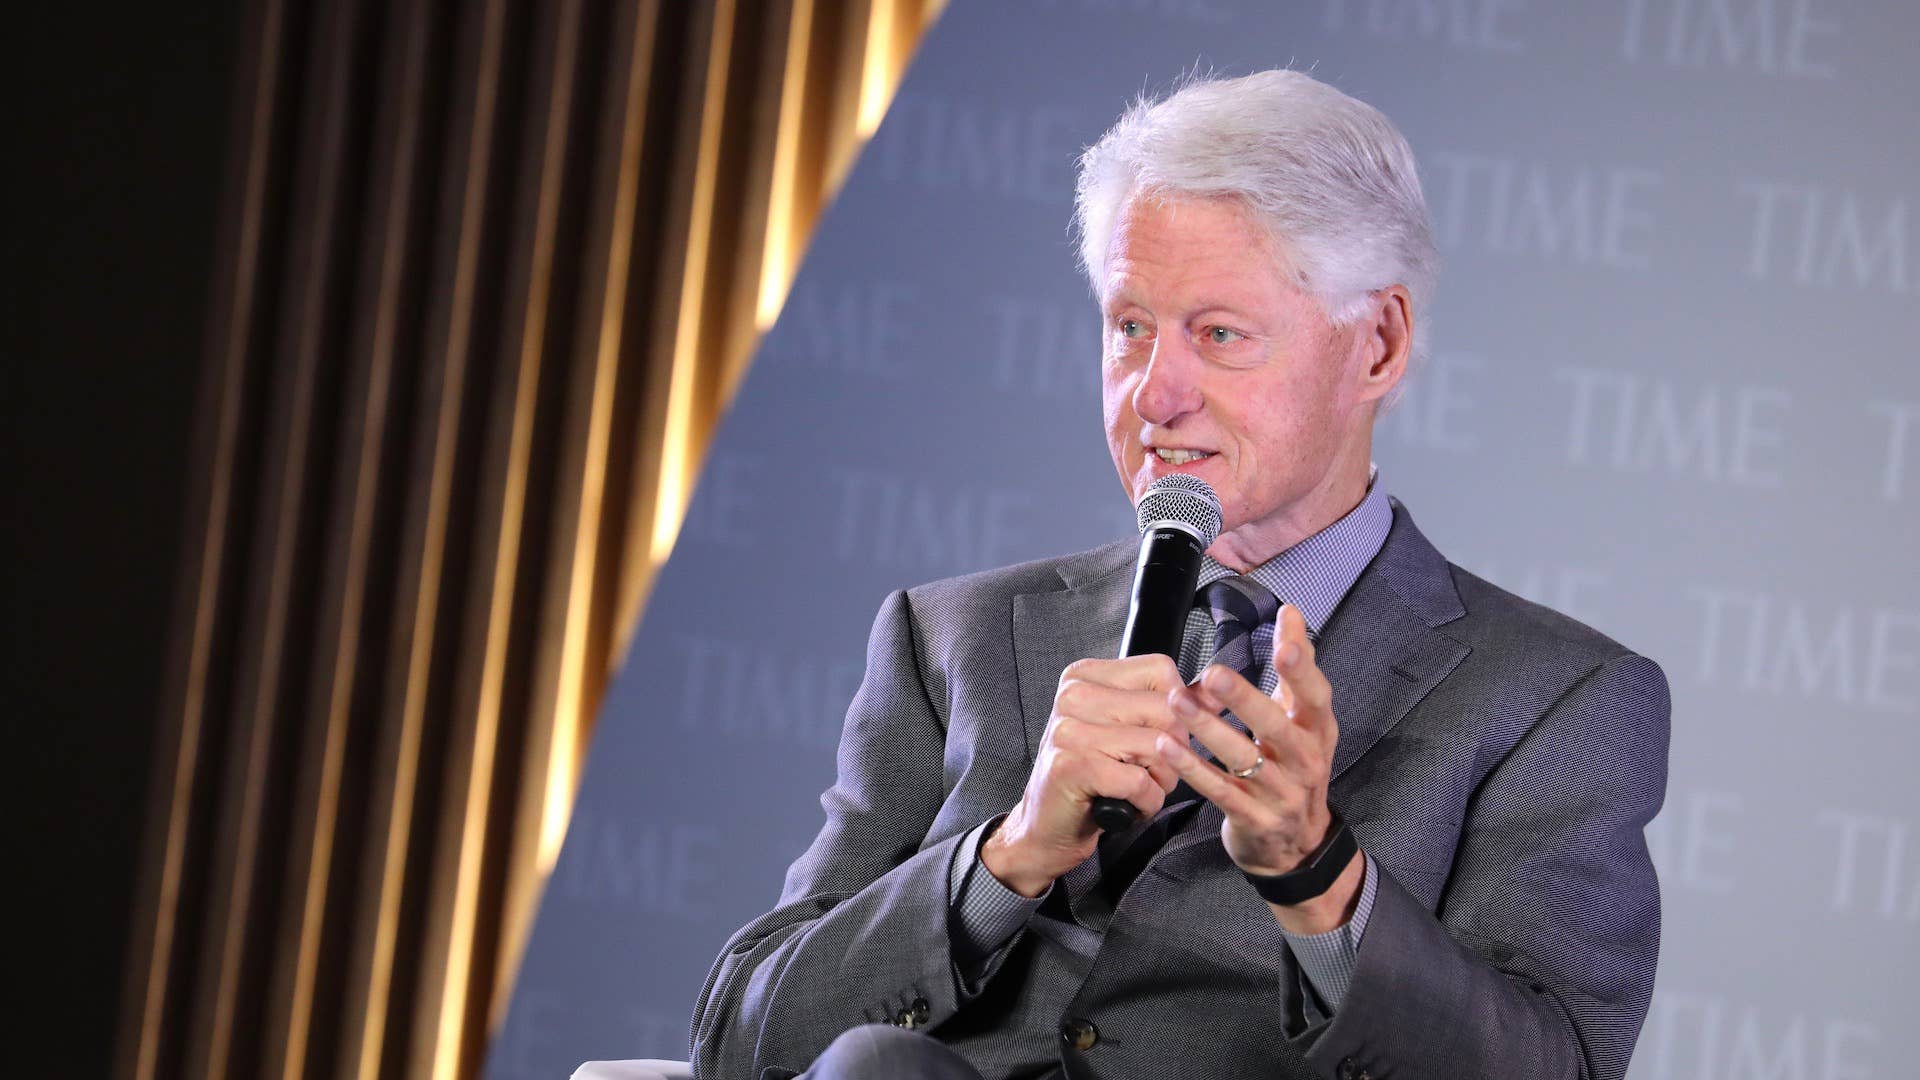 Former U.S. President Bill Clinton speaks onstage during the TIME 100 Health Summit